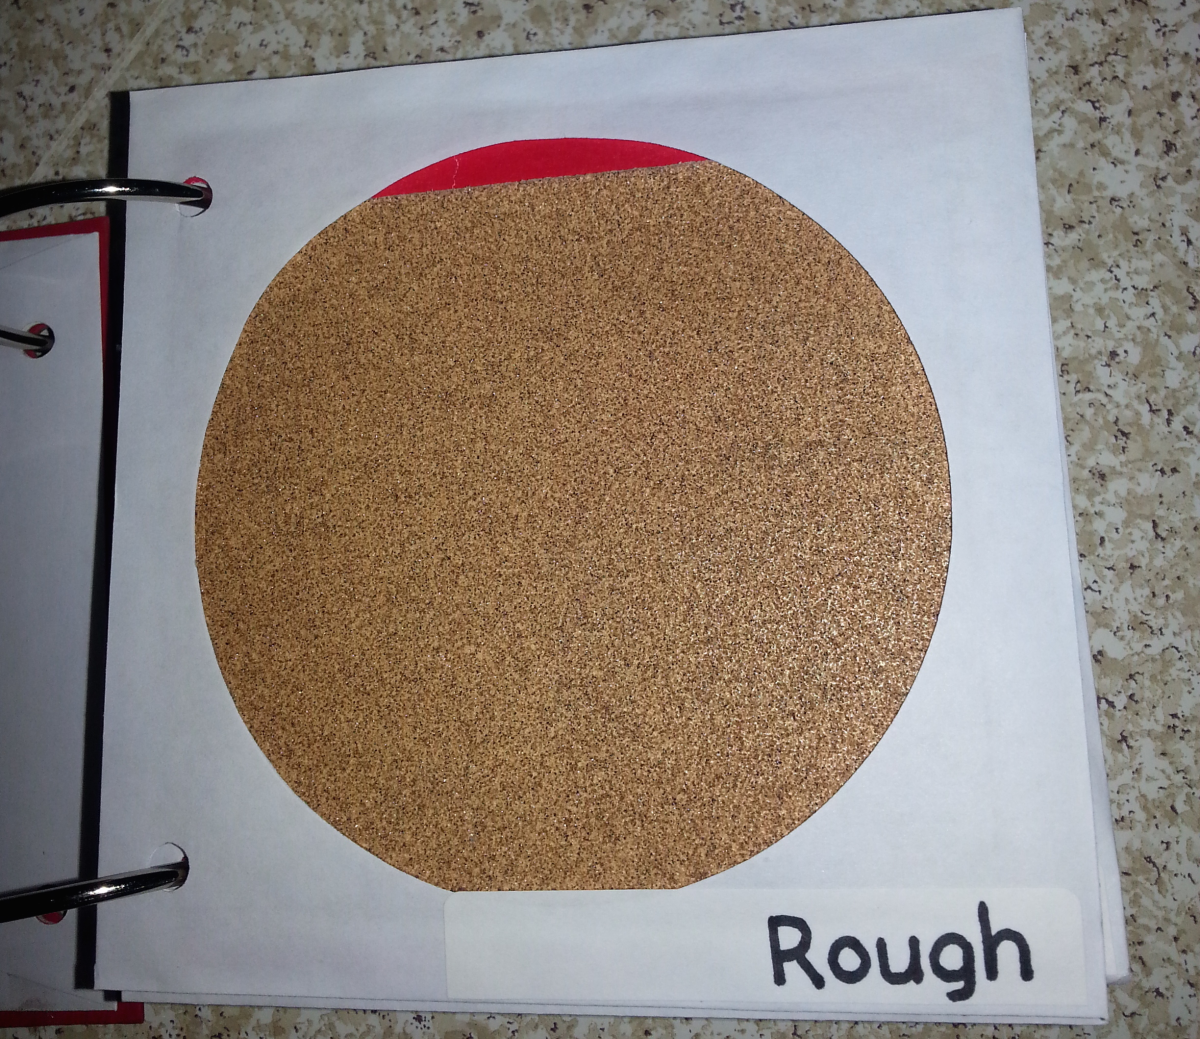 rough texture page with red circle with sandpaper